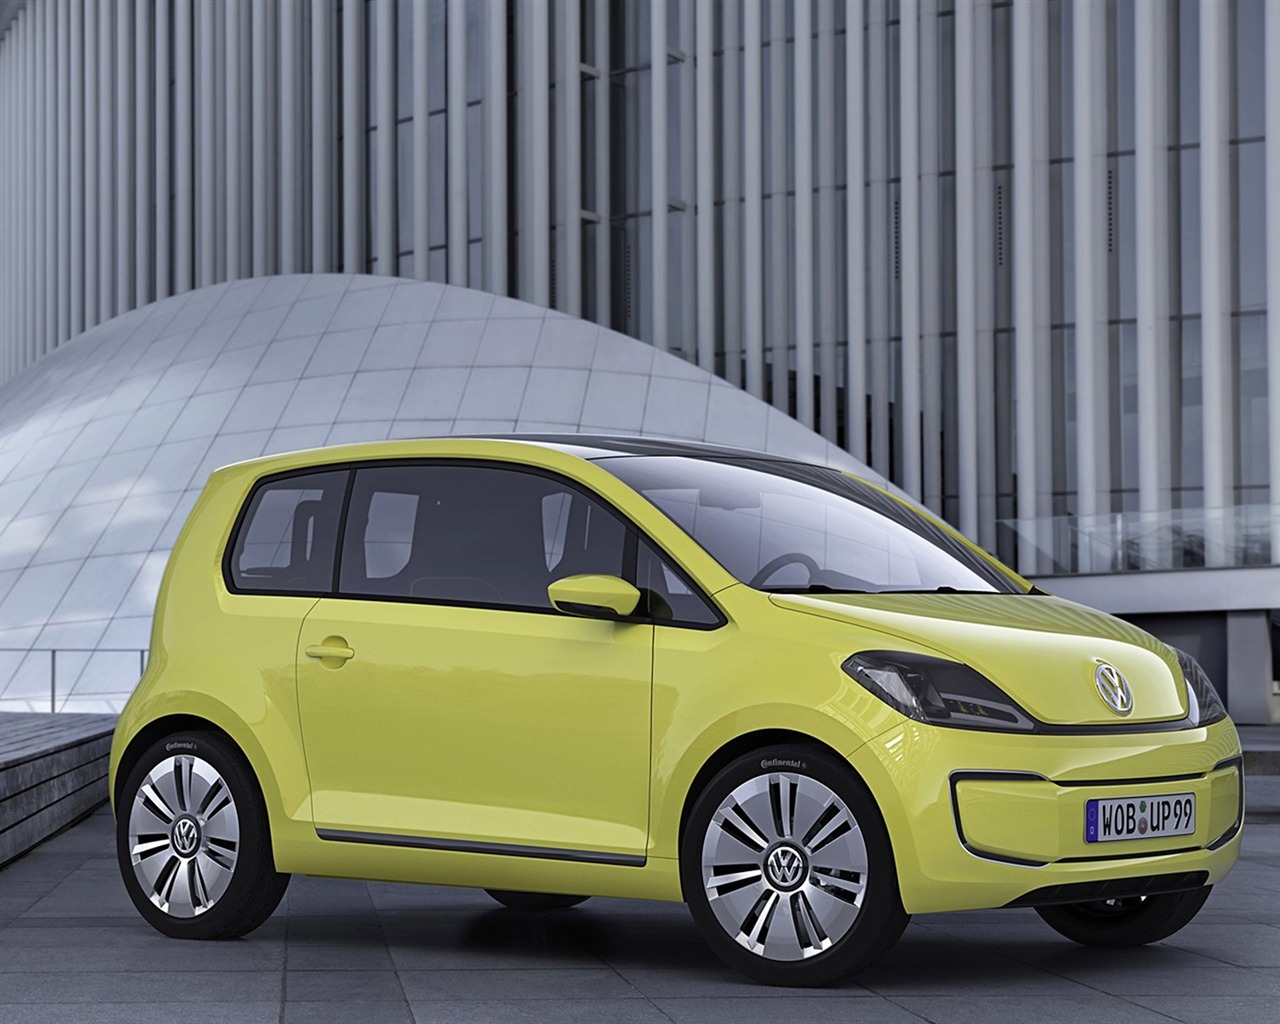 Volkswagen Concept Car tapety (2) #15 - 1280x1024